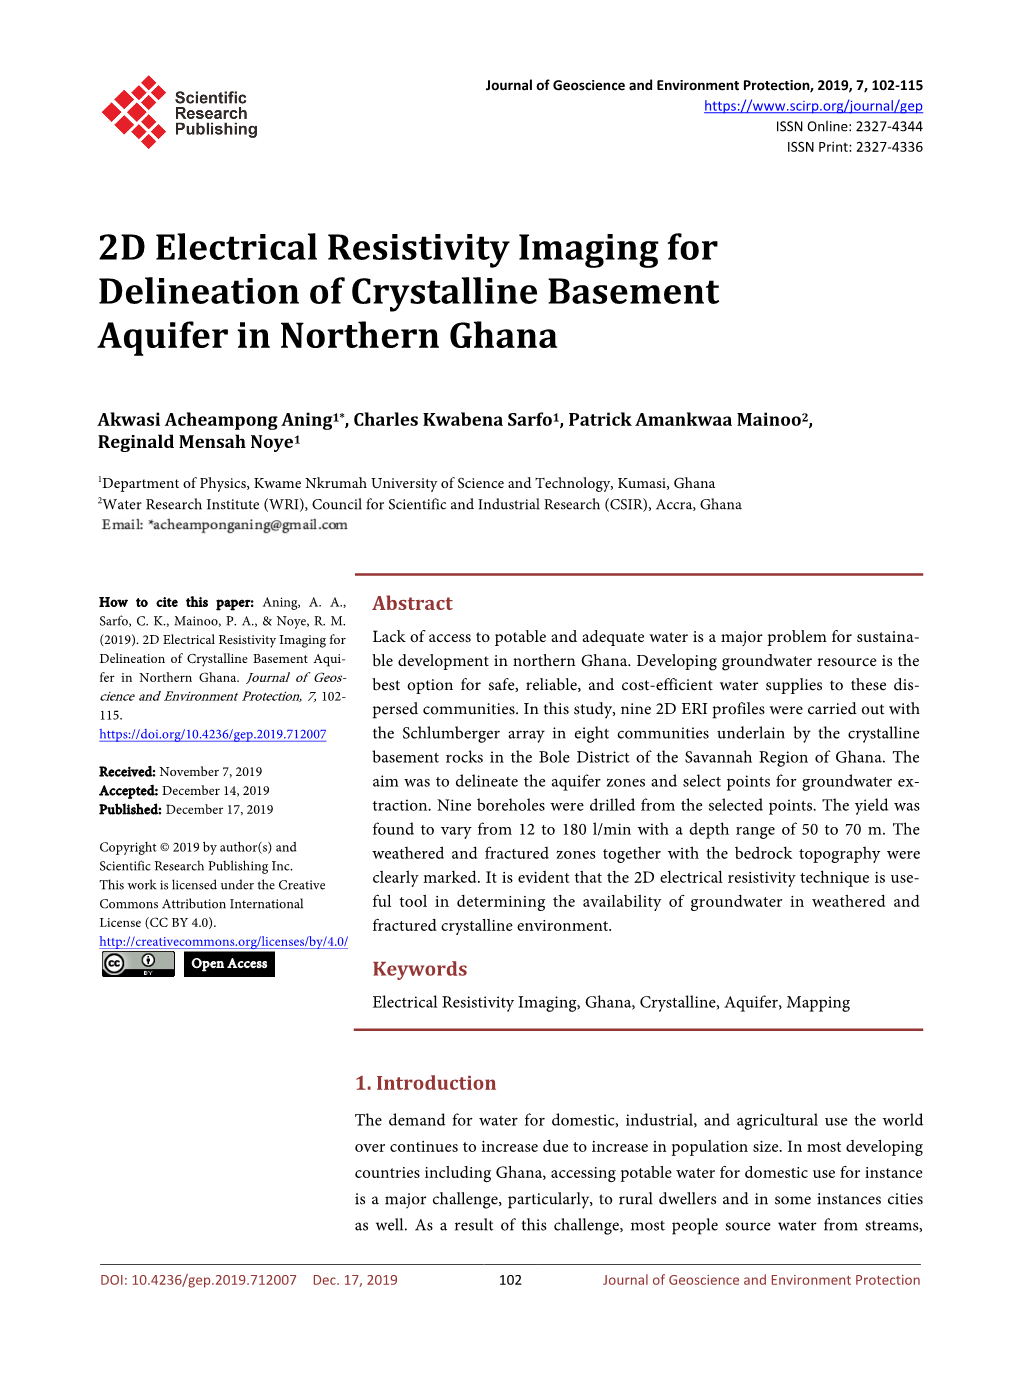 2D Electrical Resistivity Imaging for Delineation of Crystalline Basement Aquifer in Northern Ghana